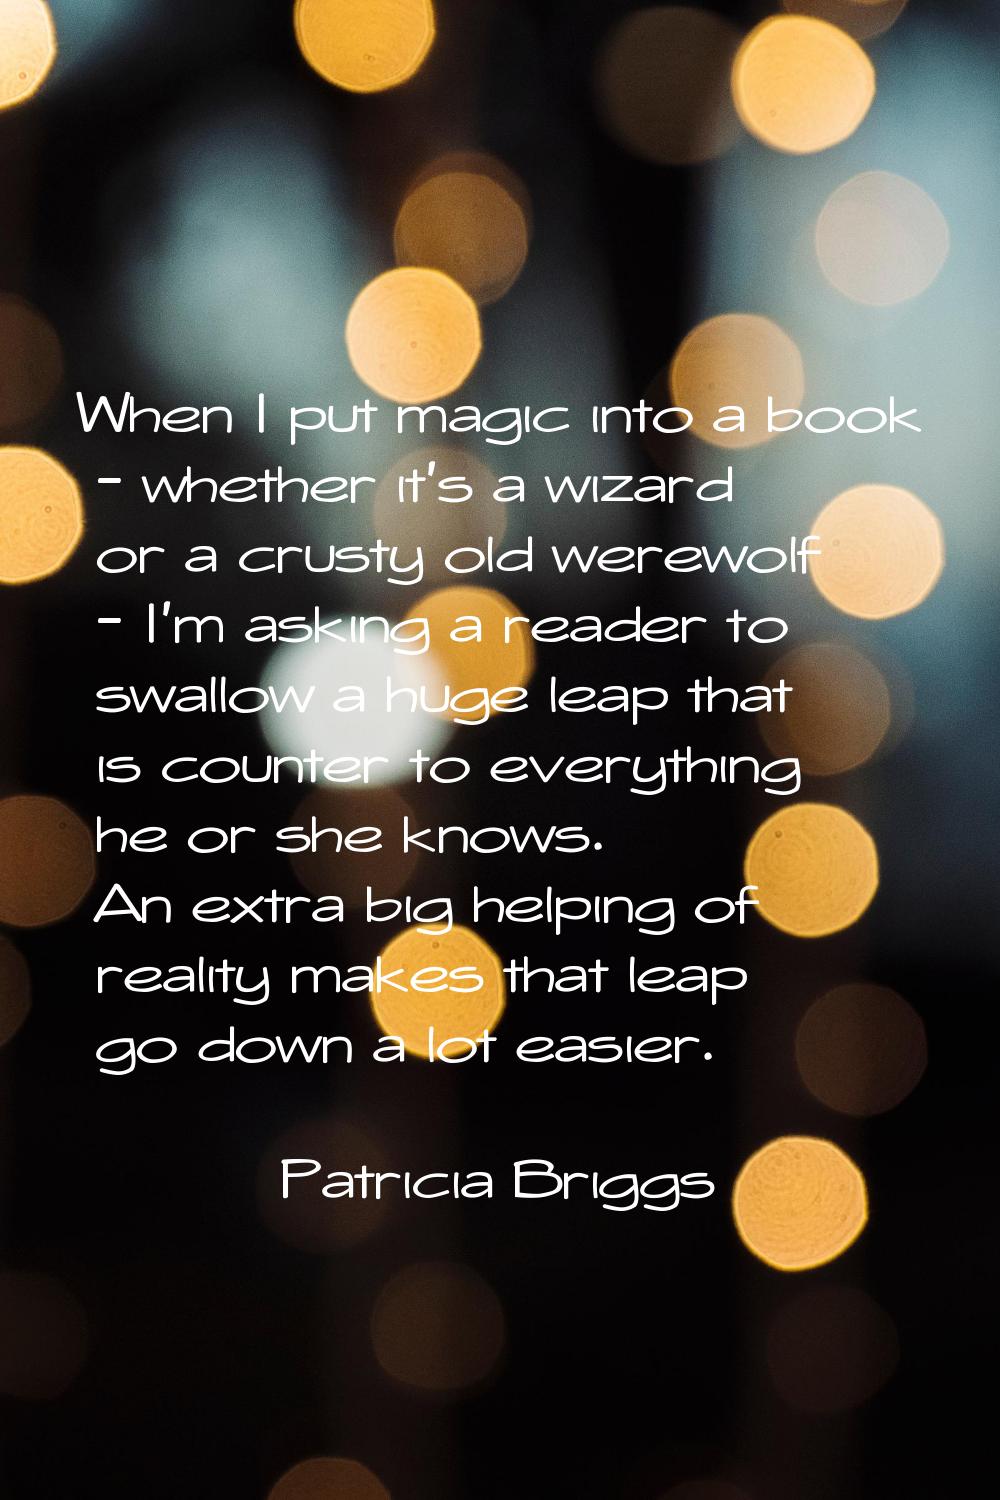 When I put magic into a book - whether it's a wizard or a crusty old werewolf - I'm asking a reader